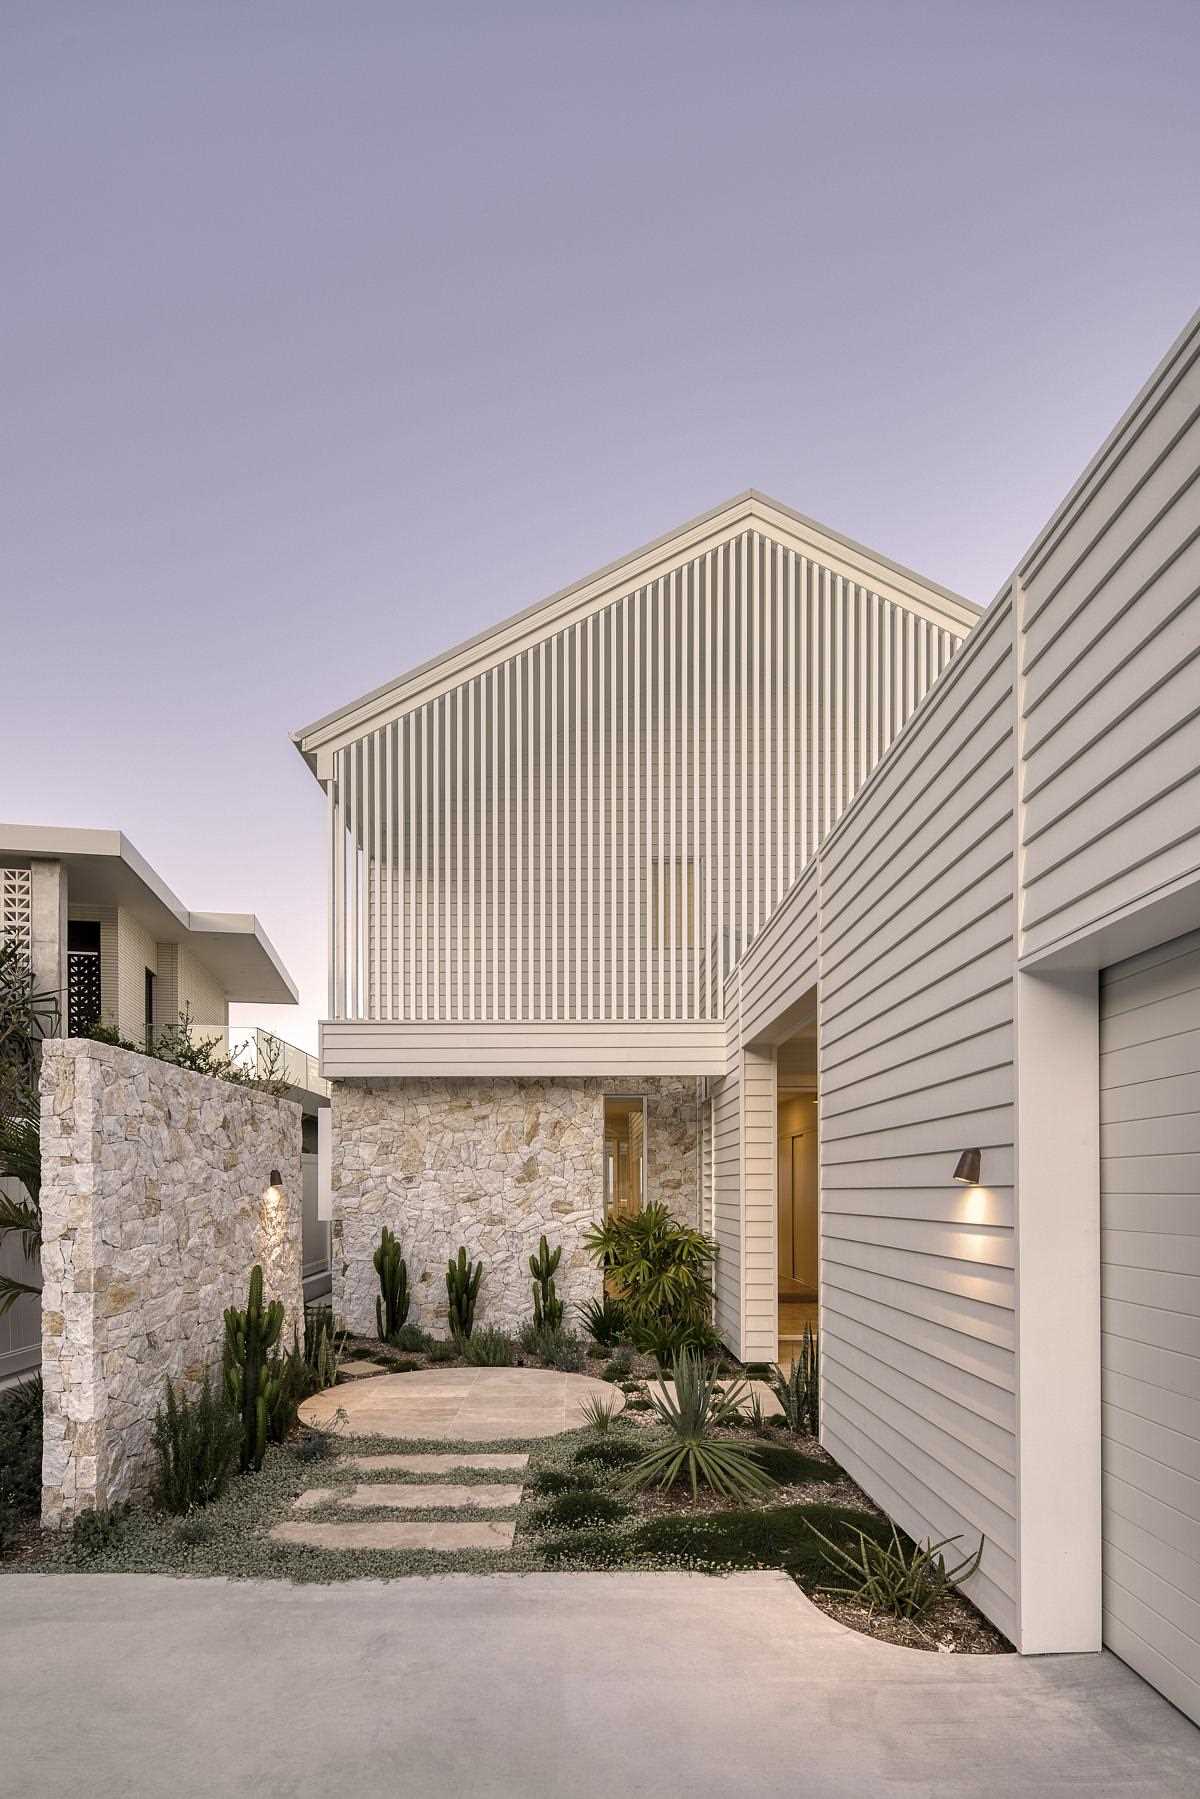 Inspired by coastal living, this modern home features an exterior of white weatherboards and white battens.